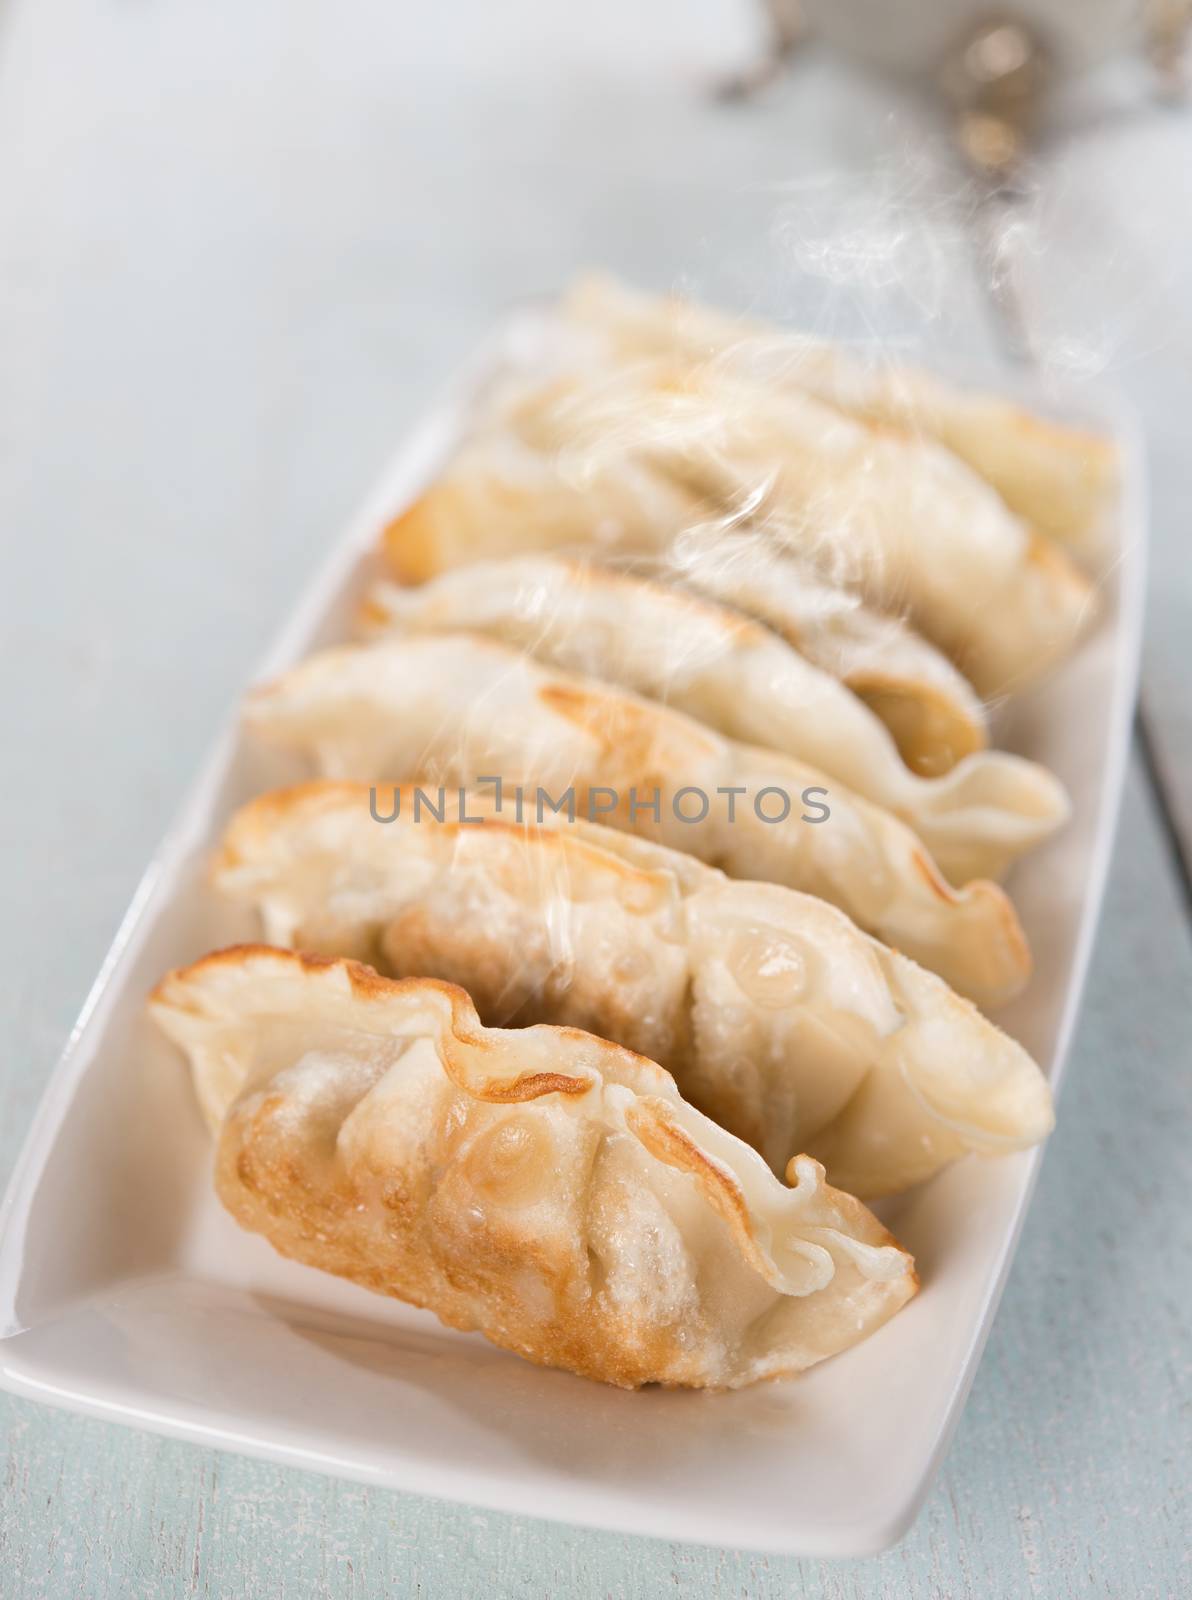 Fresh pan fried dumplings on plate with hot steams. Asian dish on rustic vintage wooden background.